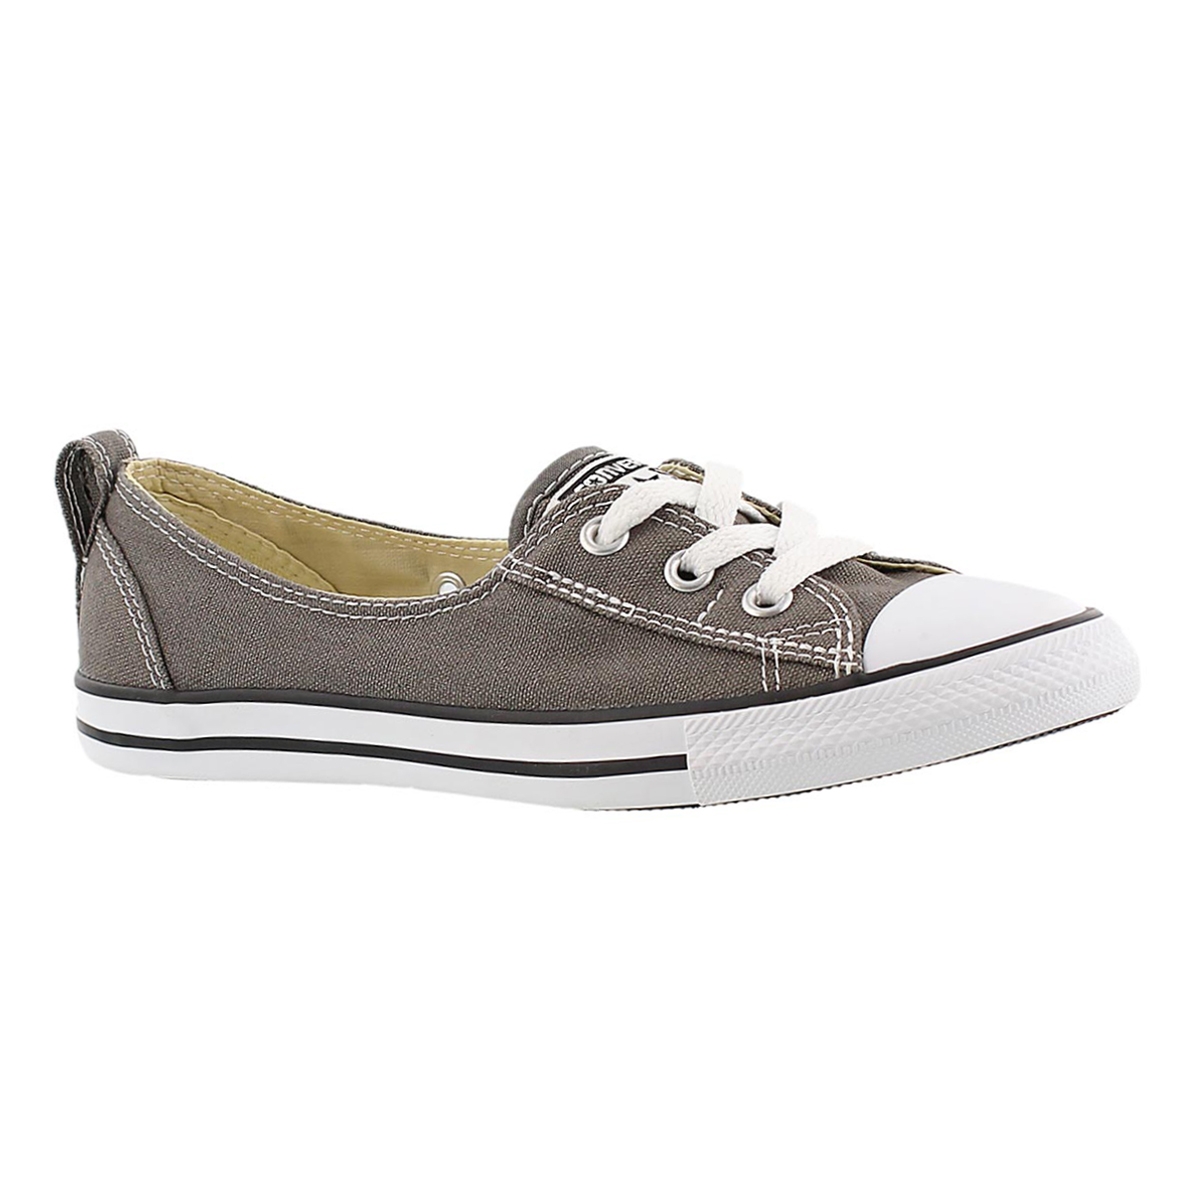 Converse Women's Chuck Taylor All Star Canvas Ballet Lace Slip-On ...